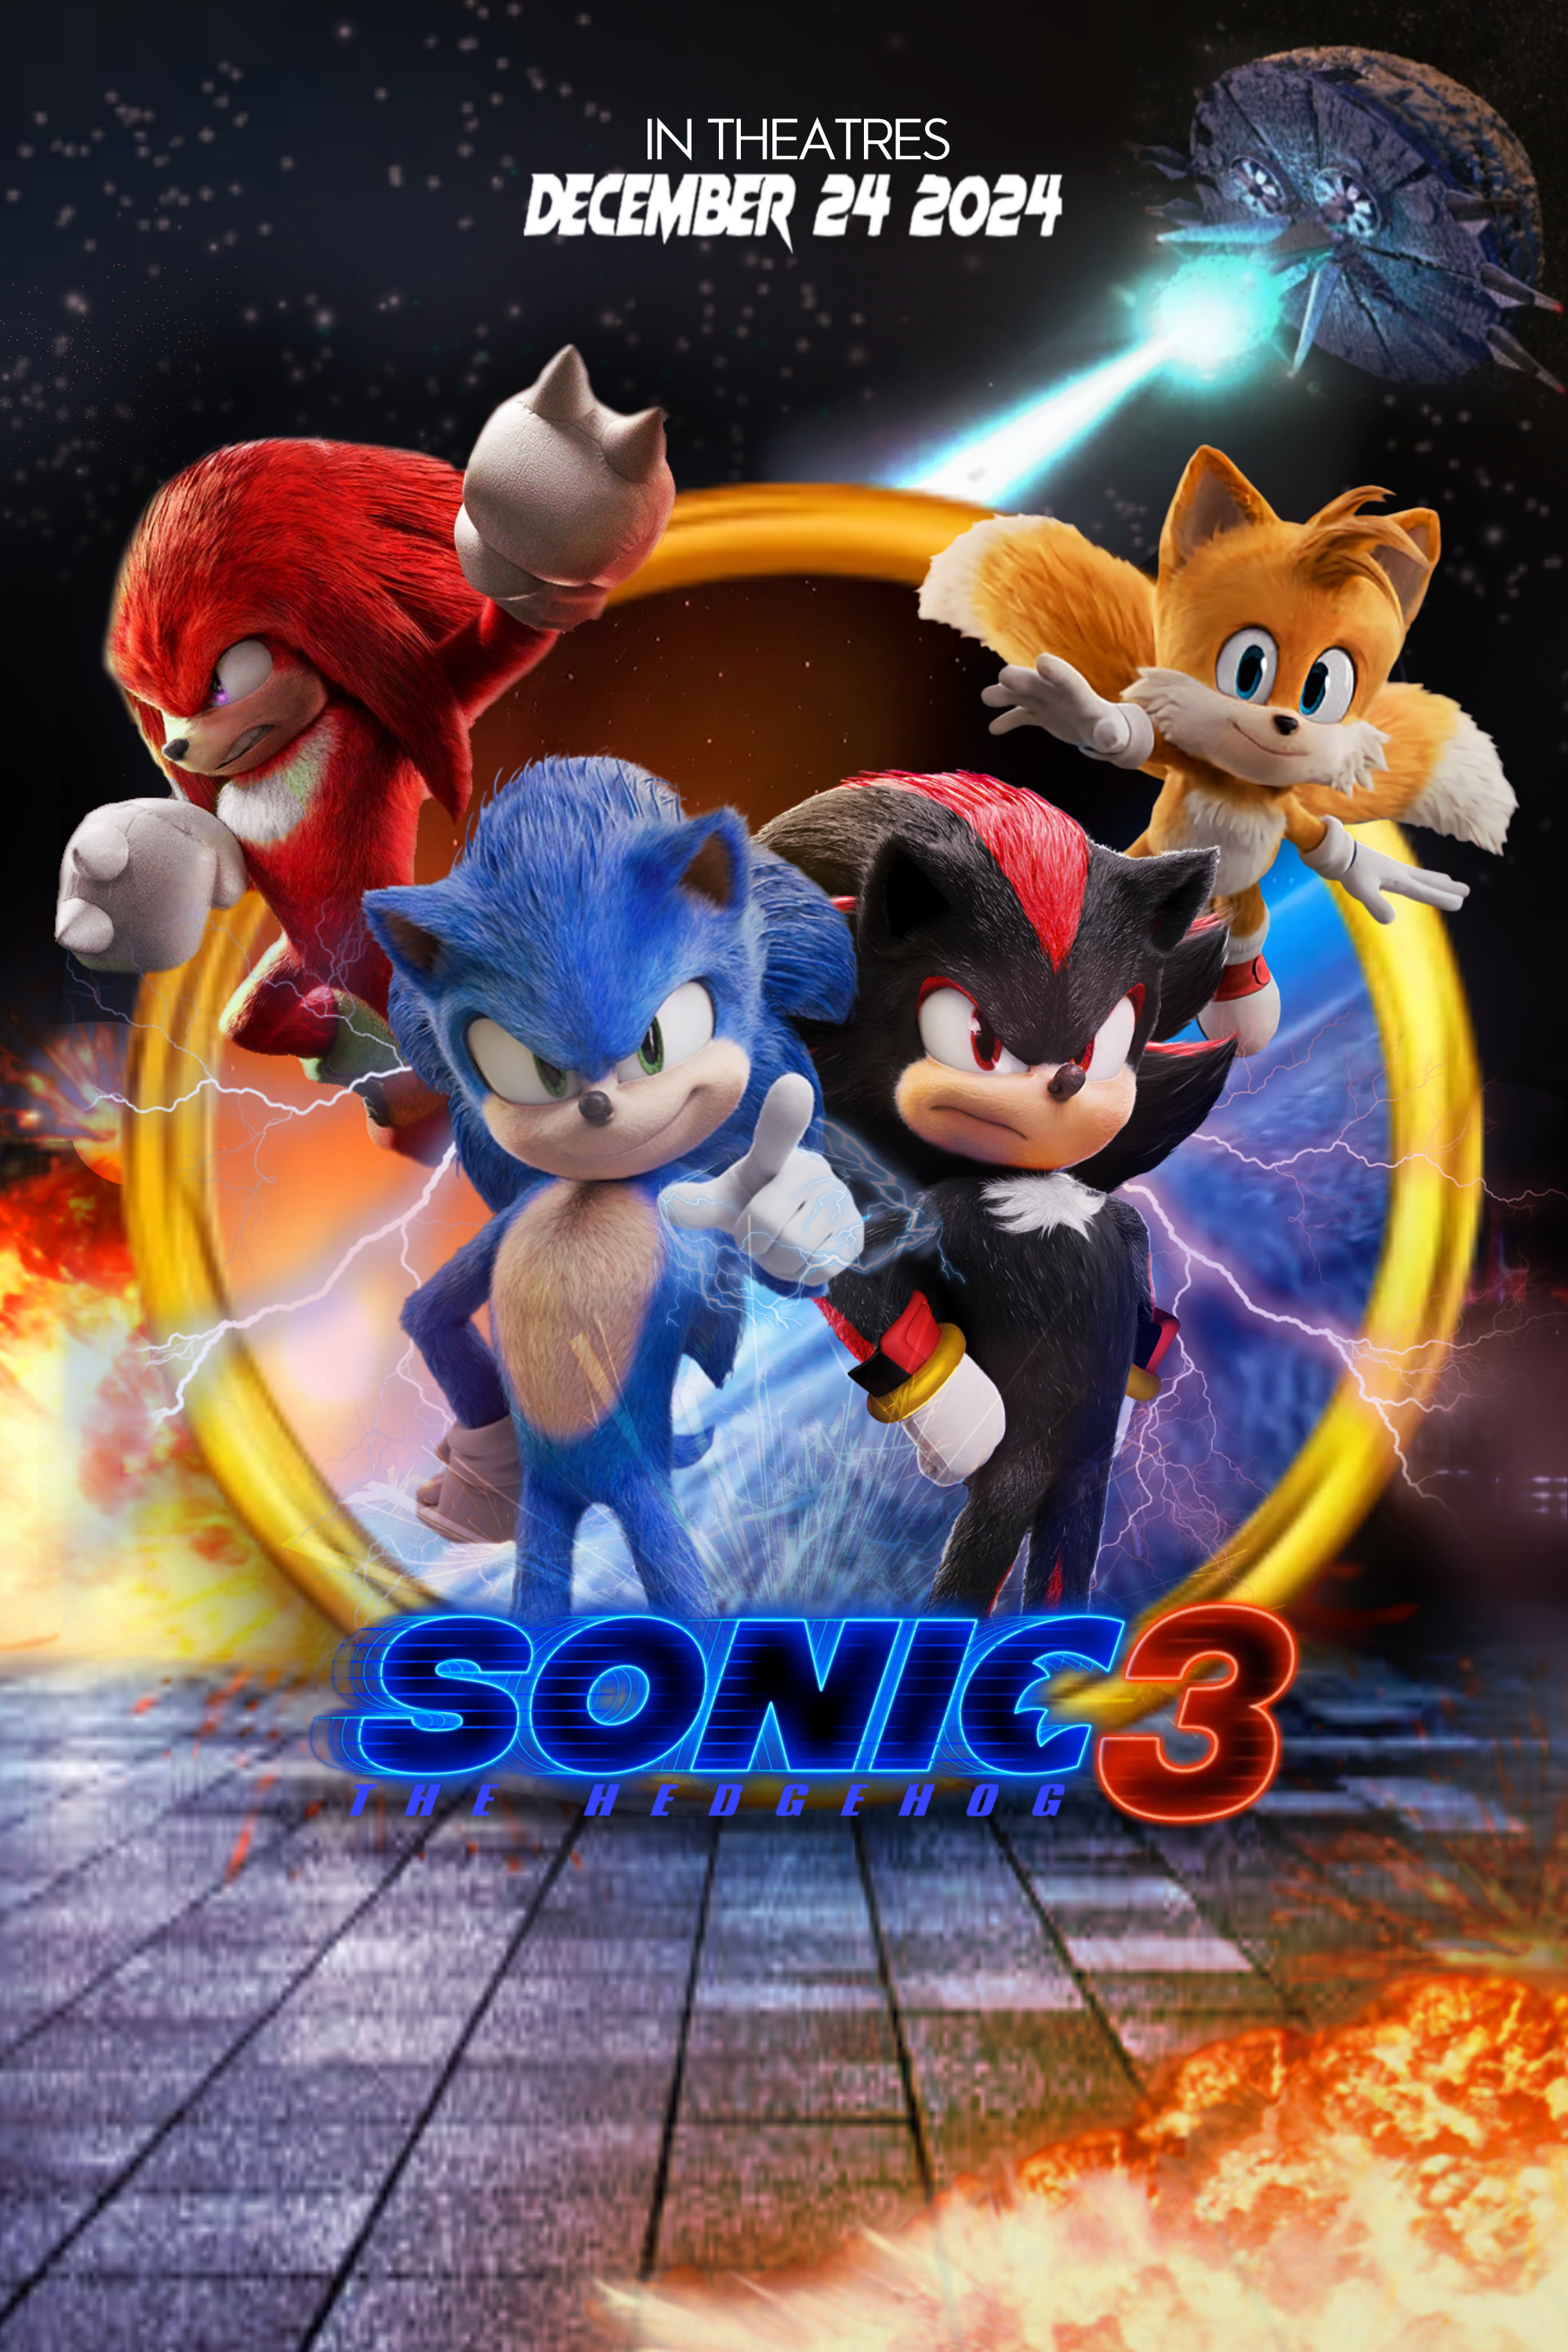 YO DUDES!!!!!, I FOUND THE SONIC THE HEDGEHOG 3 2024 POSTER AND WHAT IT LOOKS LIKE!!!! IT S DEAD GAME OVER FOR MARIO AND IT' S GAME ON FOR SONIC, BRO!!!!!!